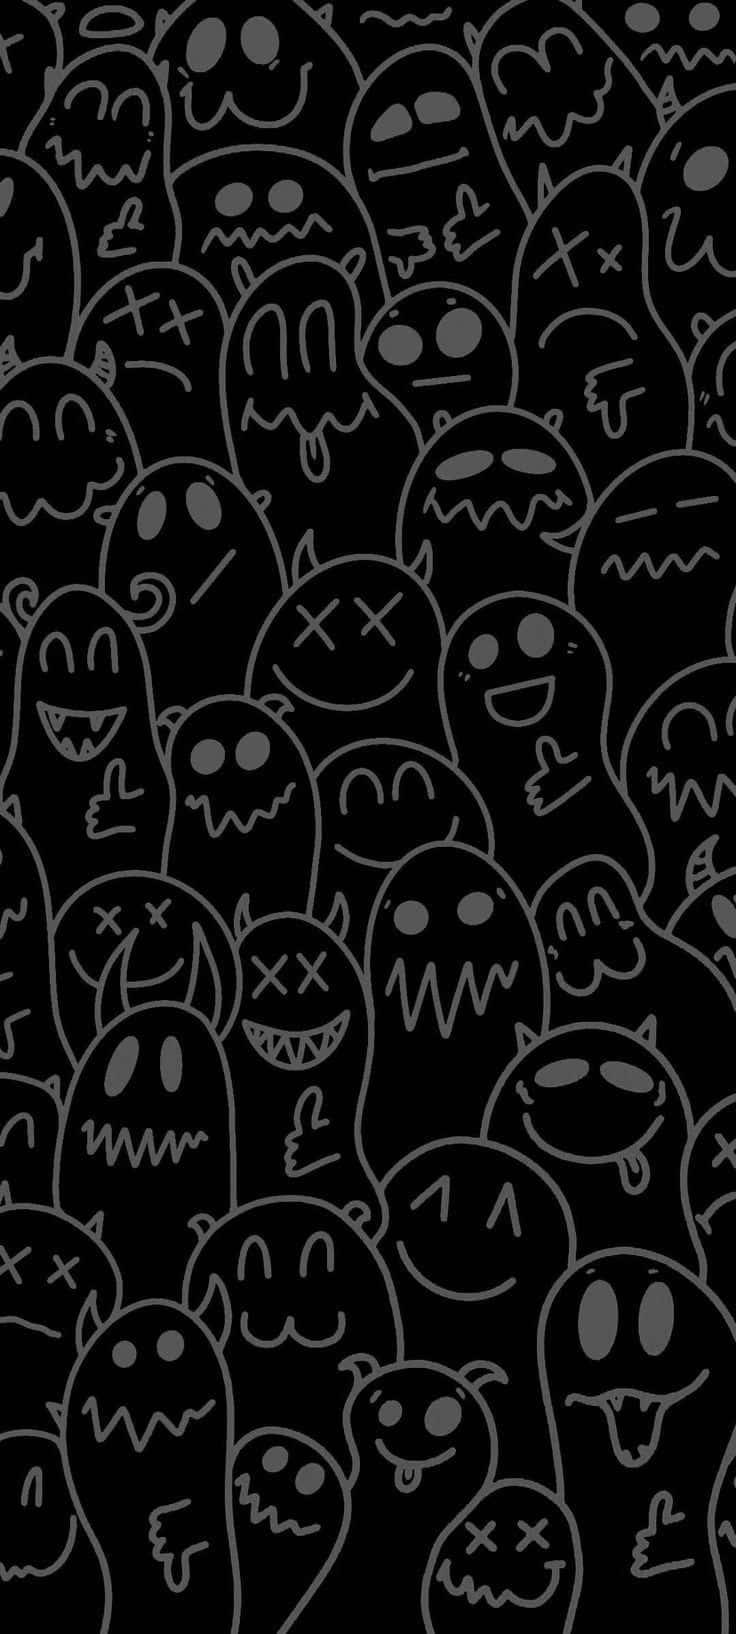 Cute Gothic Ghosts Black Aesthetic Wallpaper